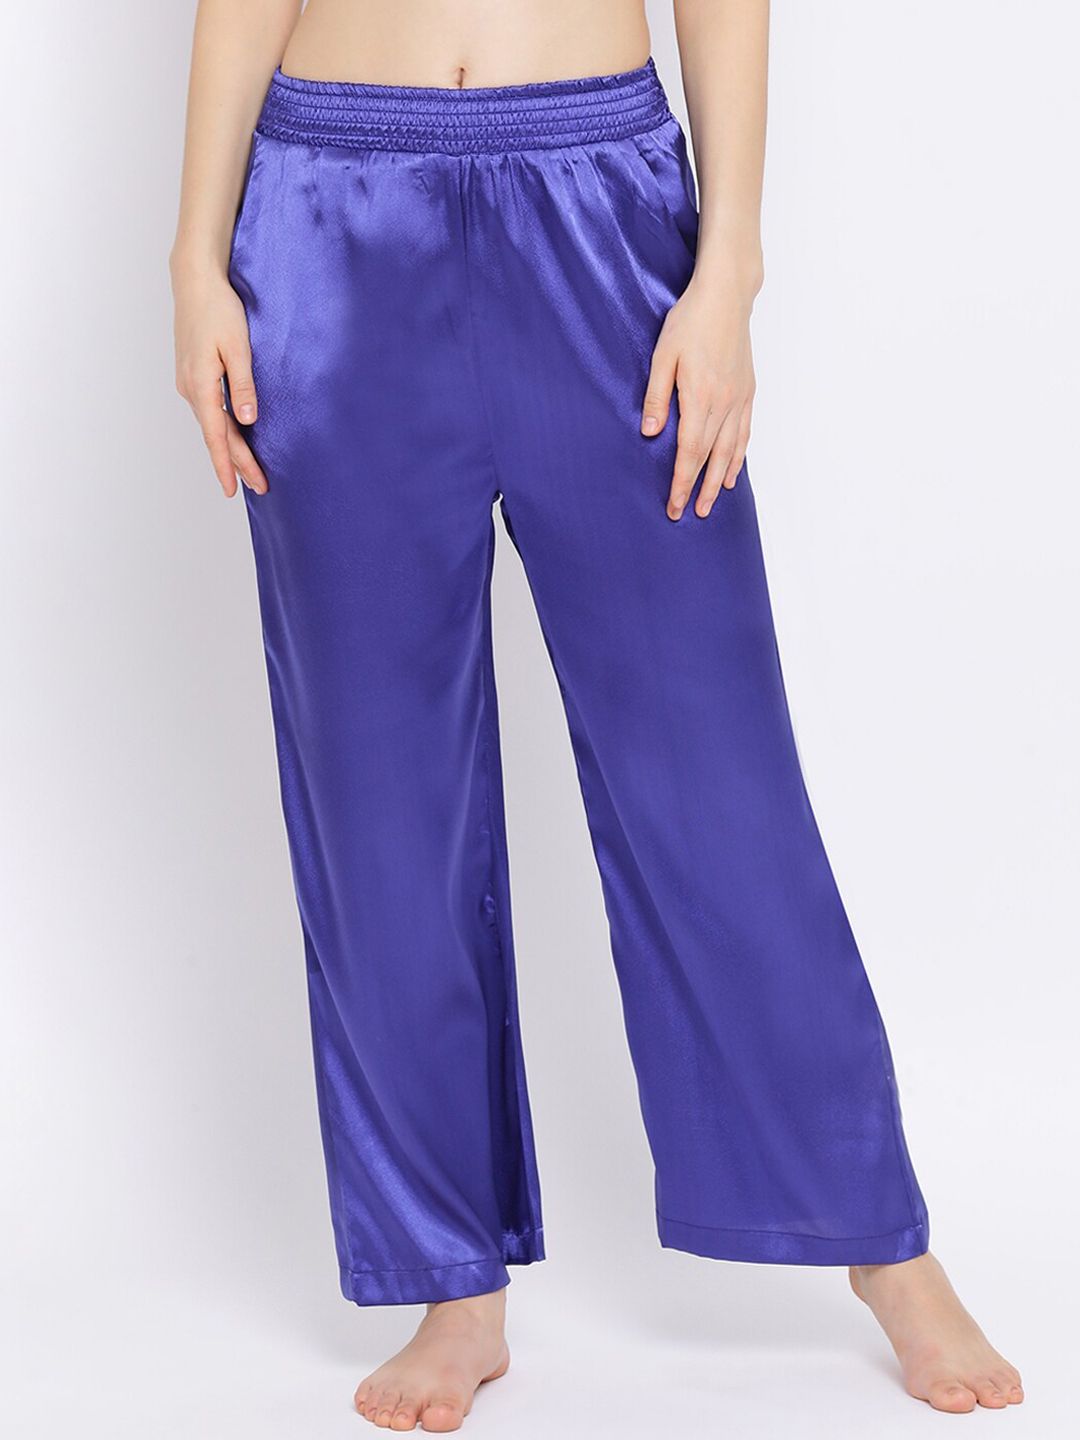 Oxolloxo Women Blue Satin Finish Solid Lounge Pants Price in India